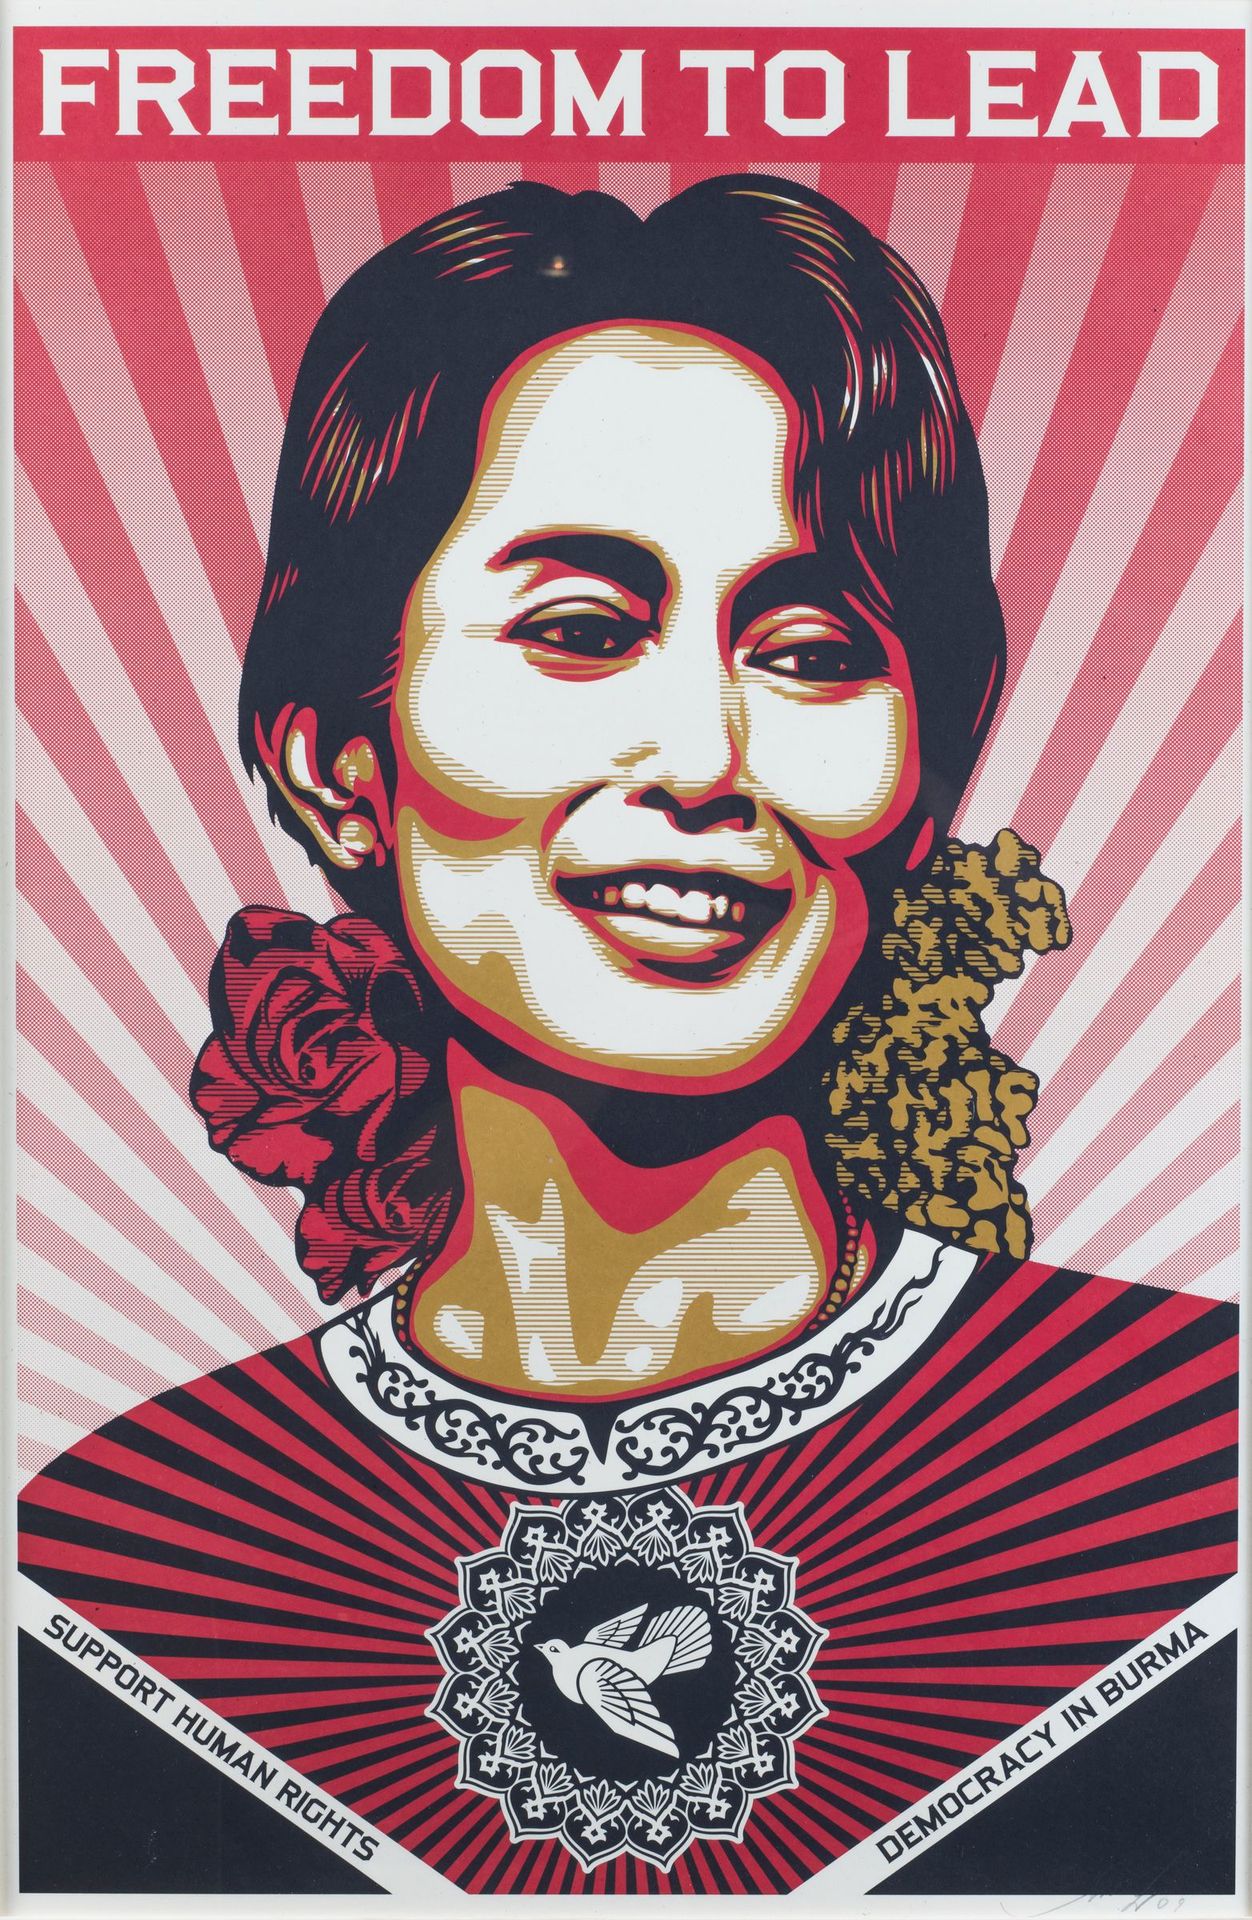 Null OBEY

Freedom To Lead Aung San Suu Kyi, 2009

Offset lithograph

91x61 cm